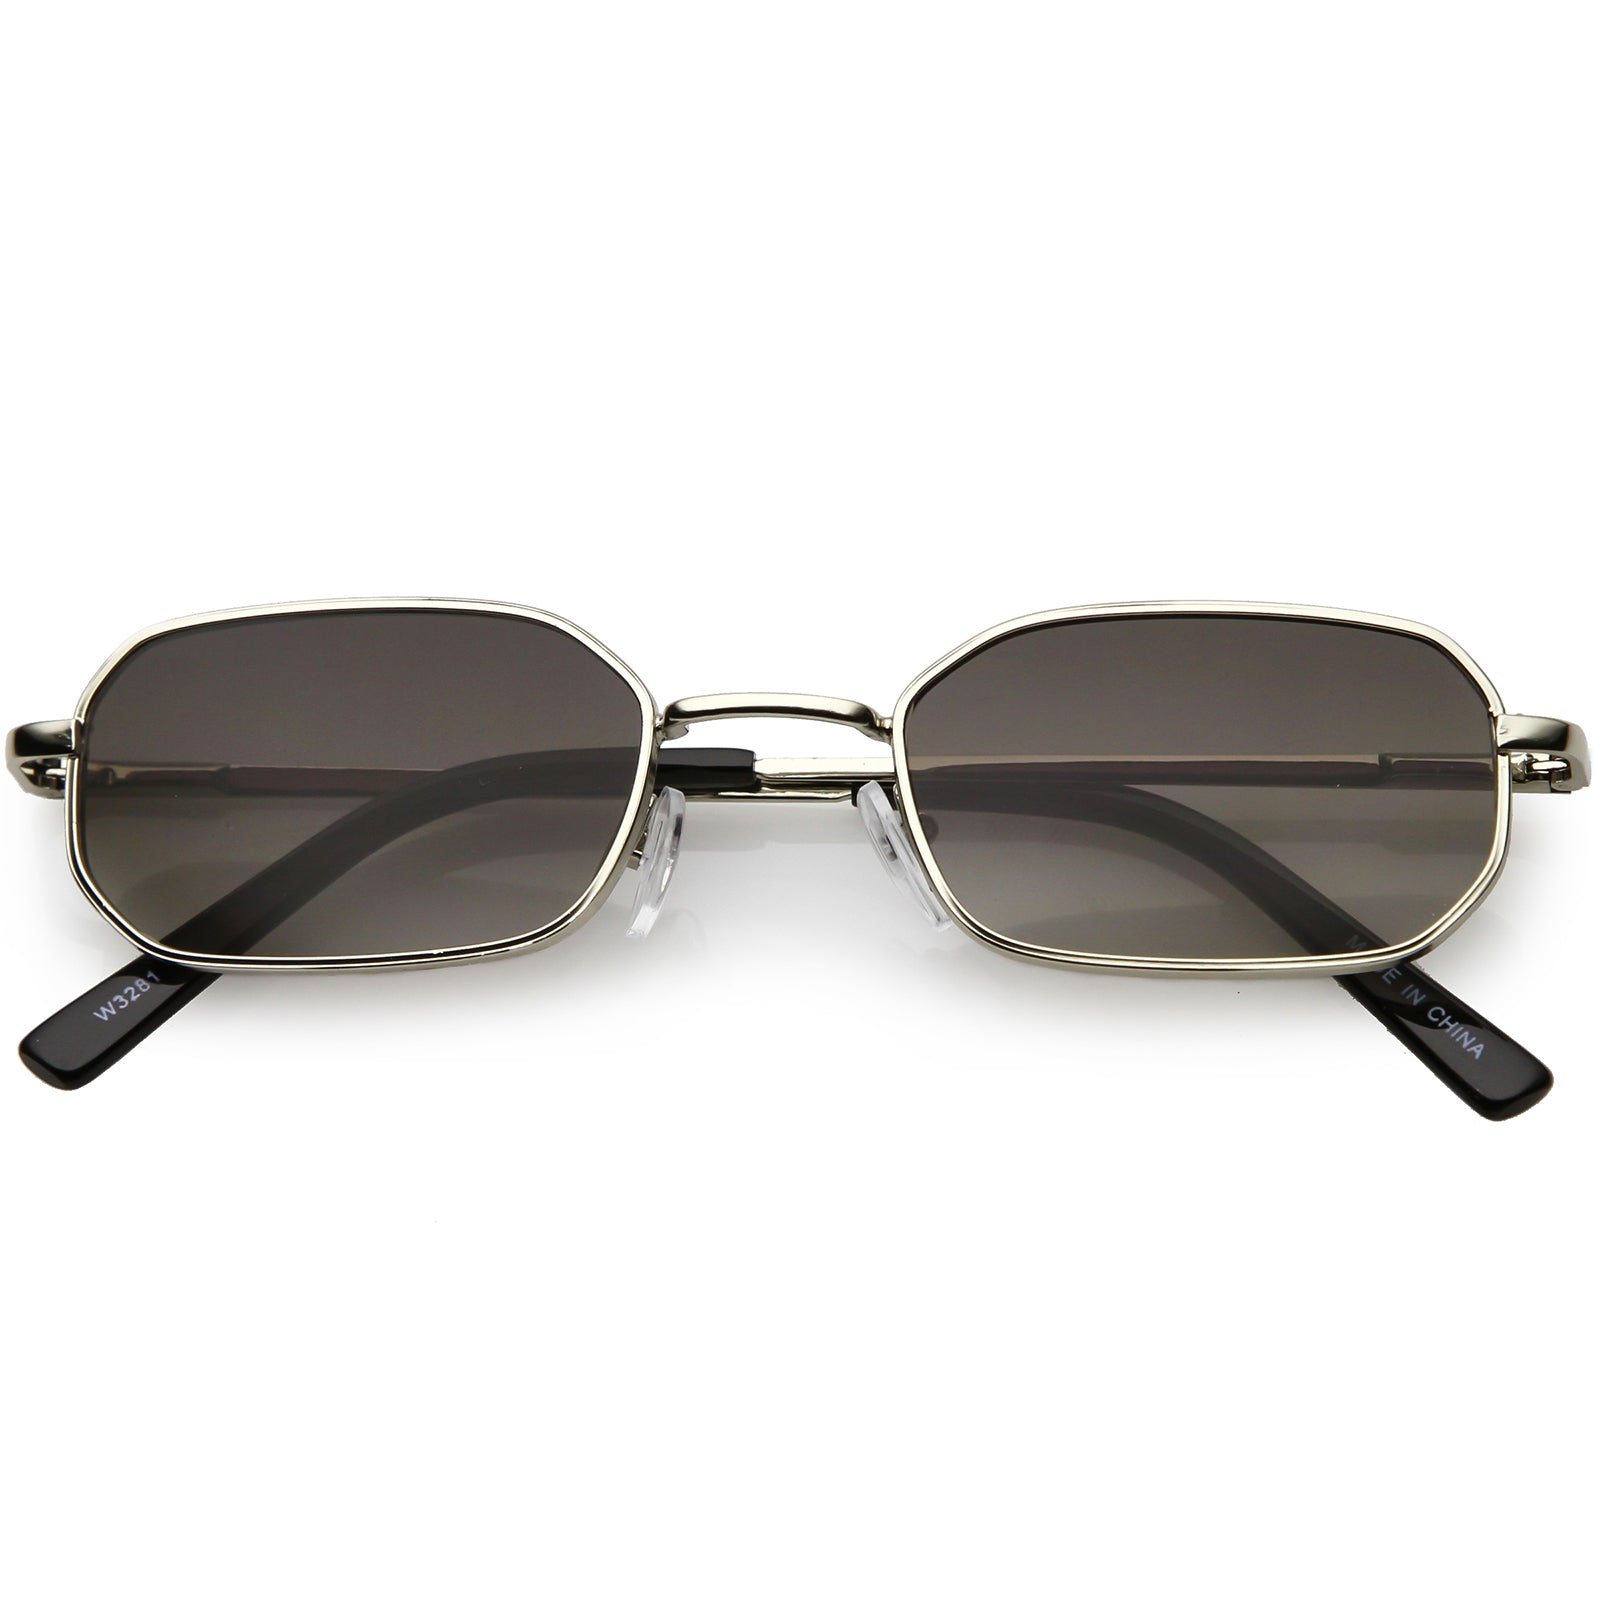 Extreme Small Metal Rectangle Sunglasses Thick Frame Flat Lens 48mm